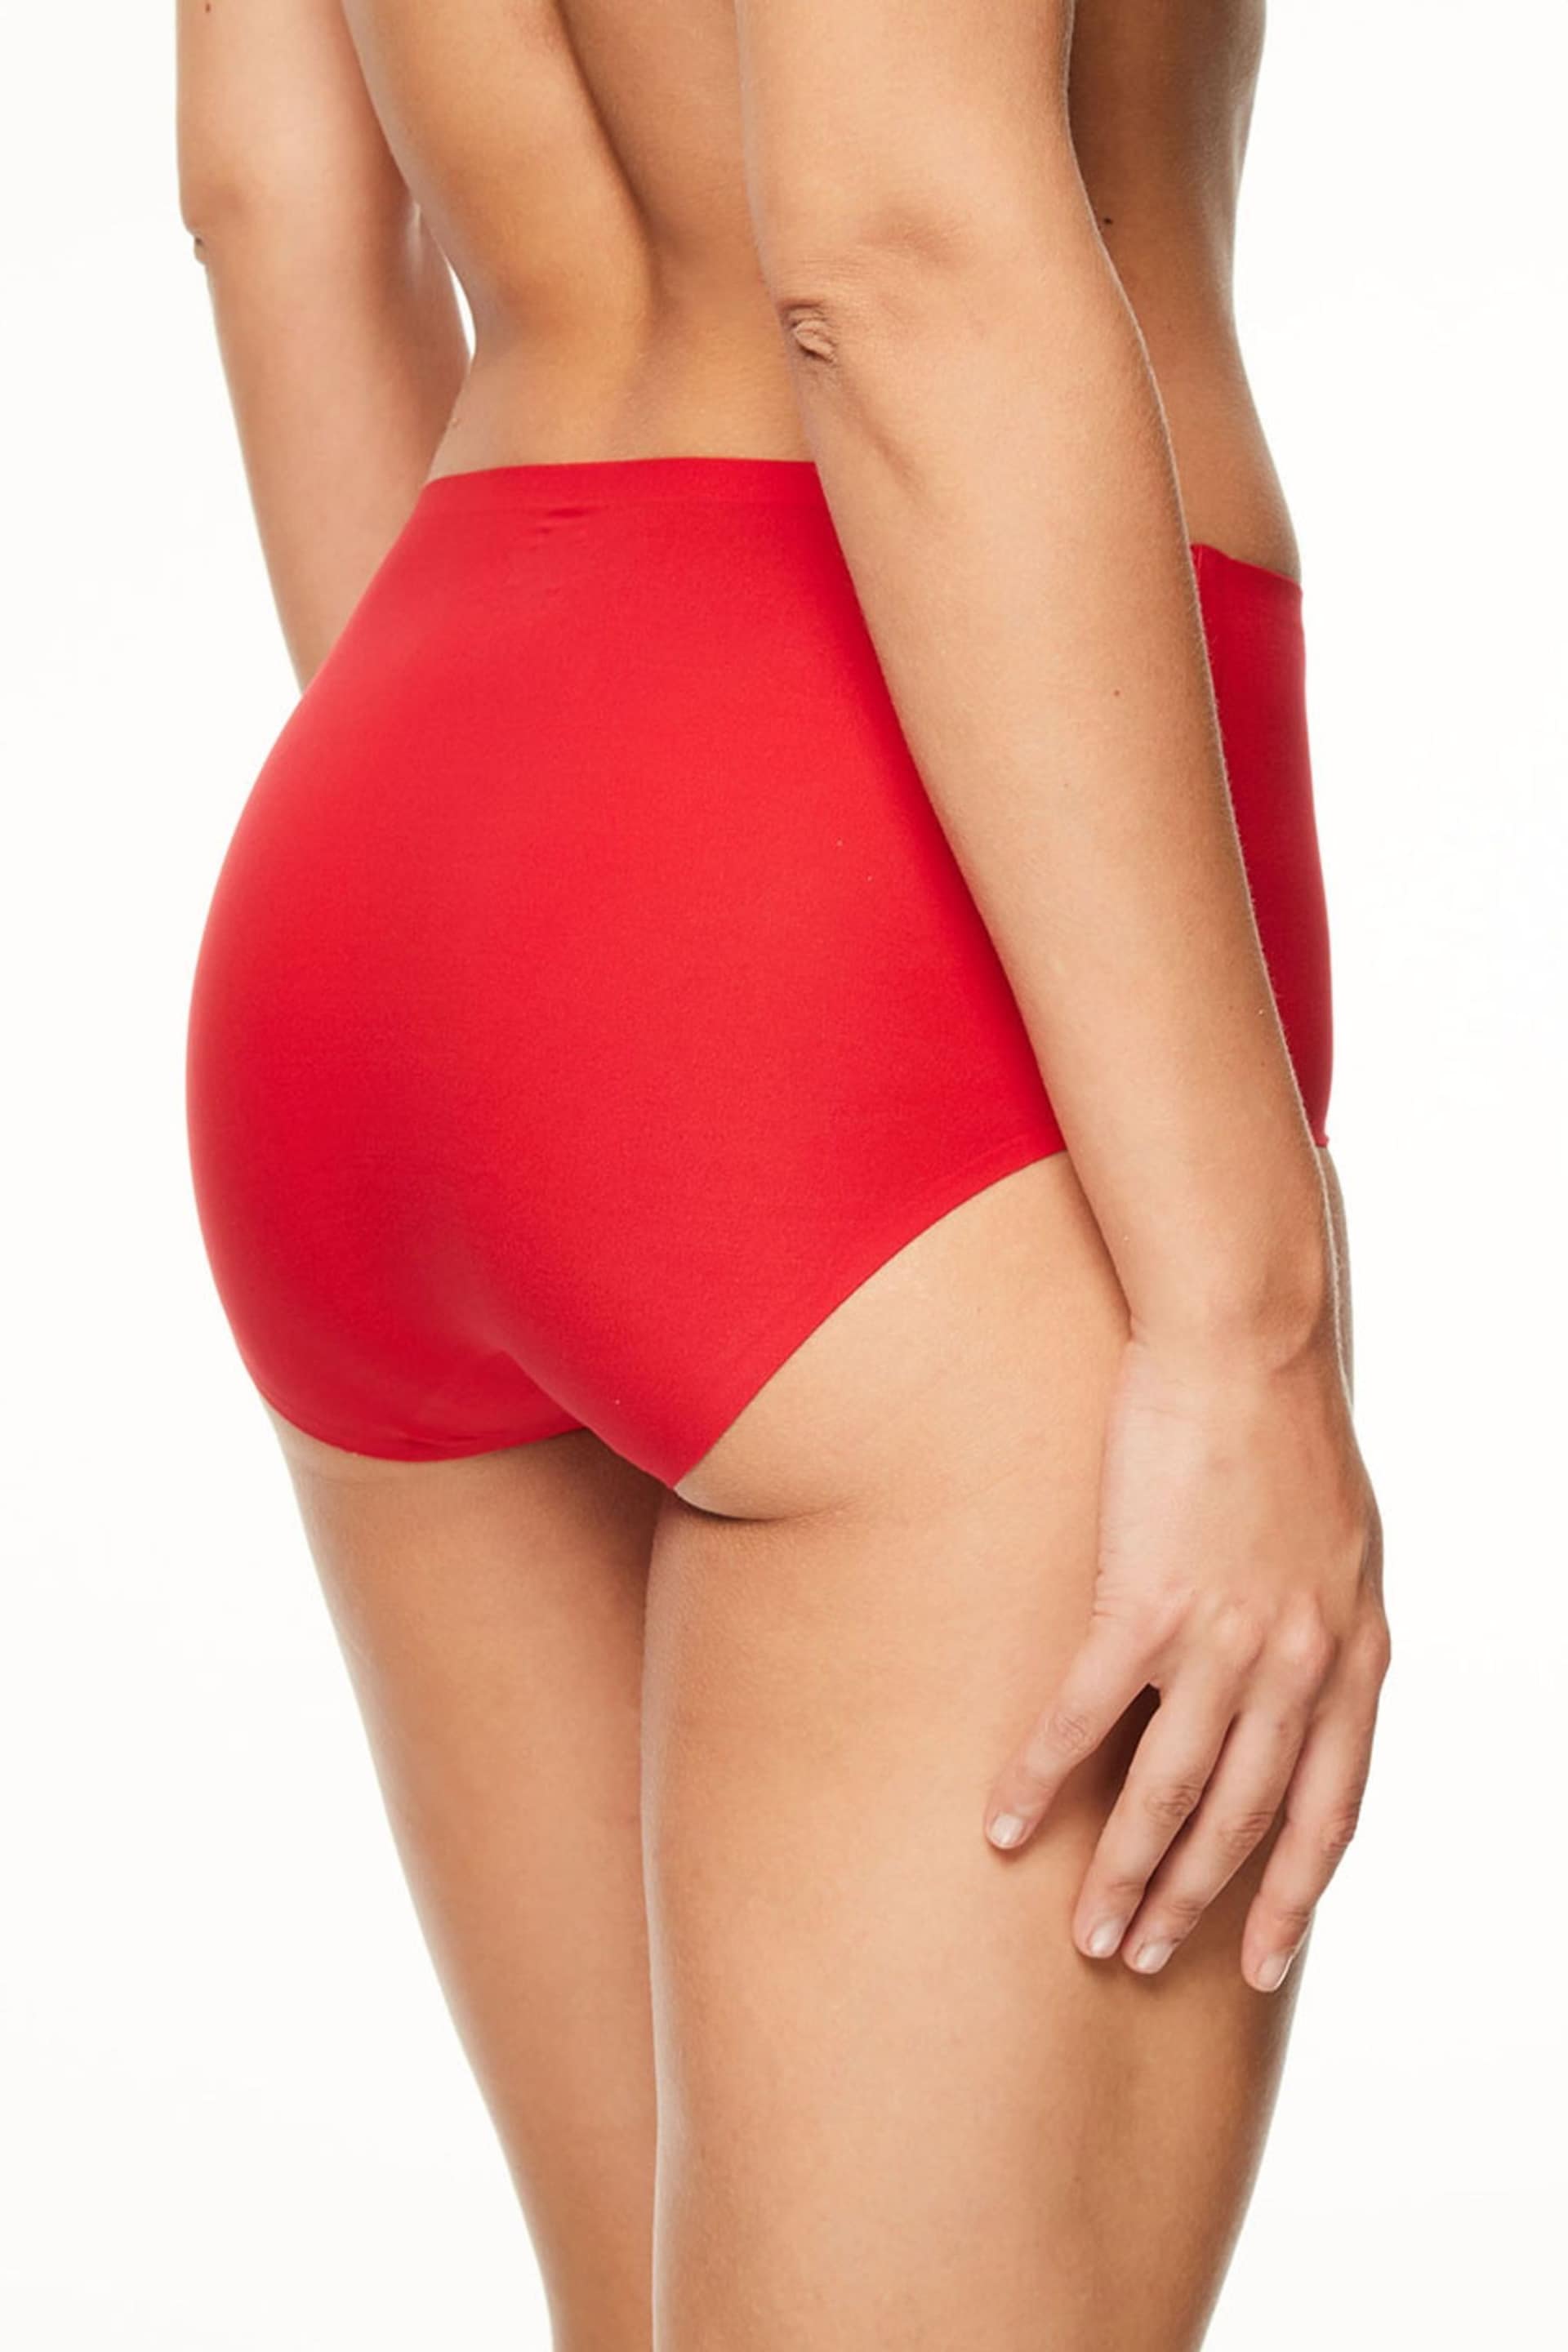 Chantelle Soft Stretch Seamless One Size High Waisted Knickers - Image 2 of 3